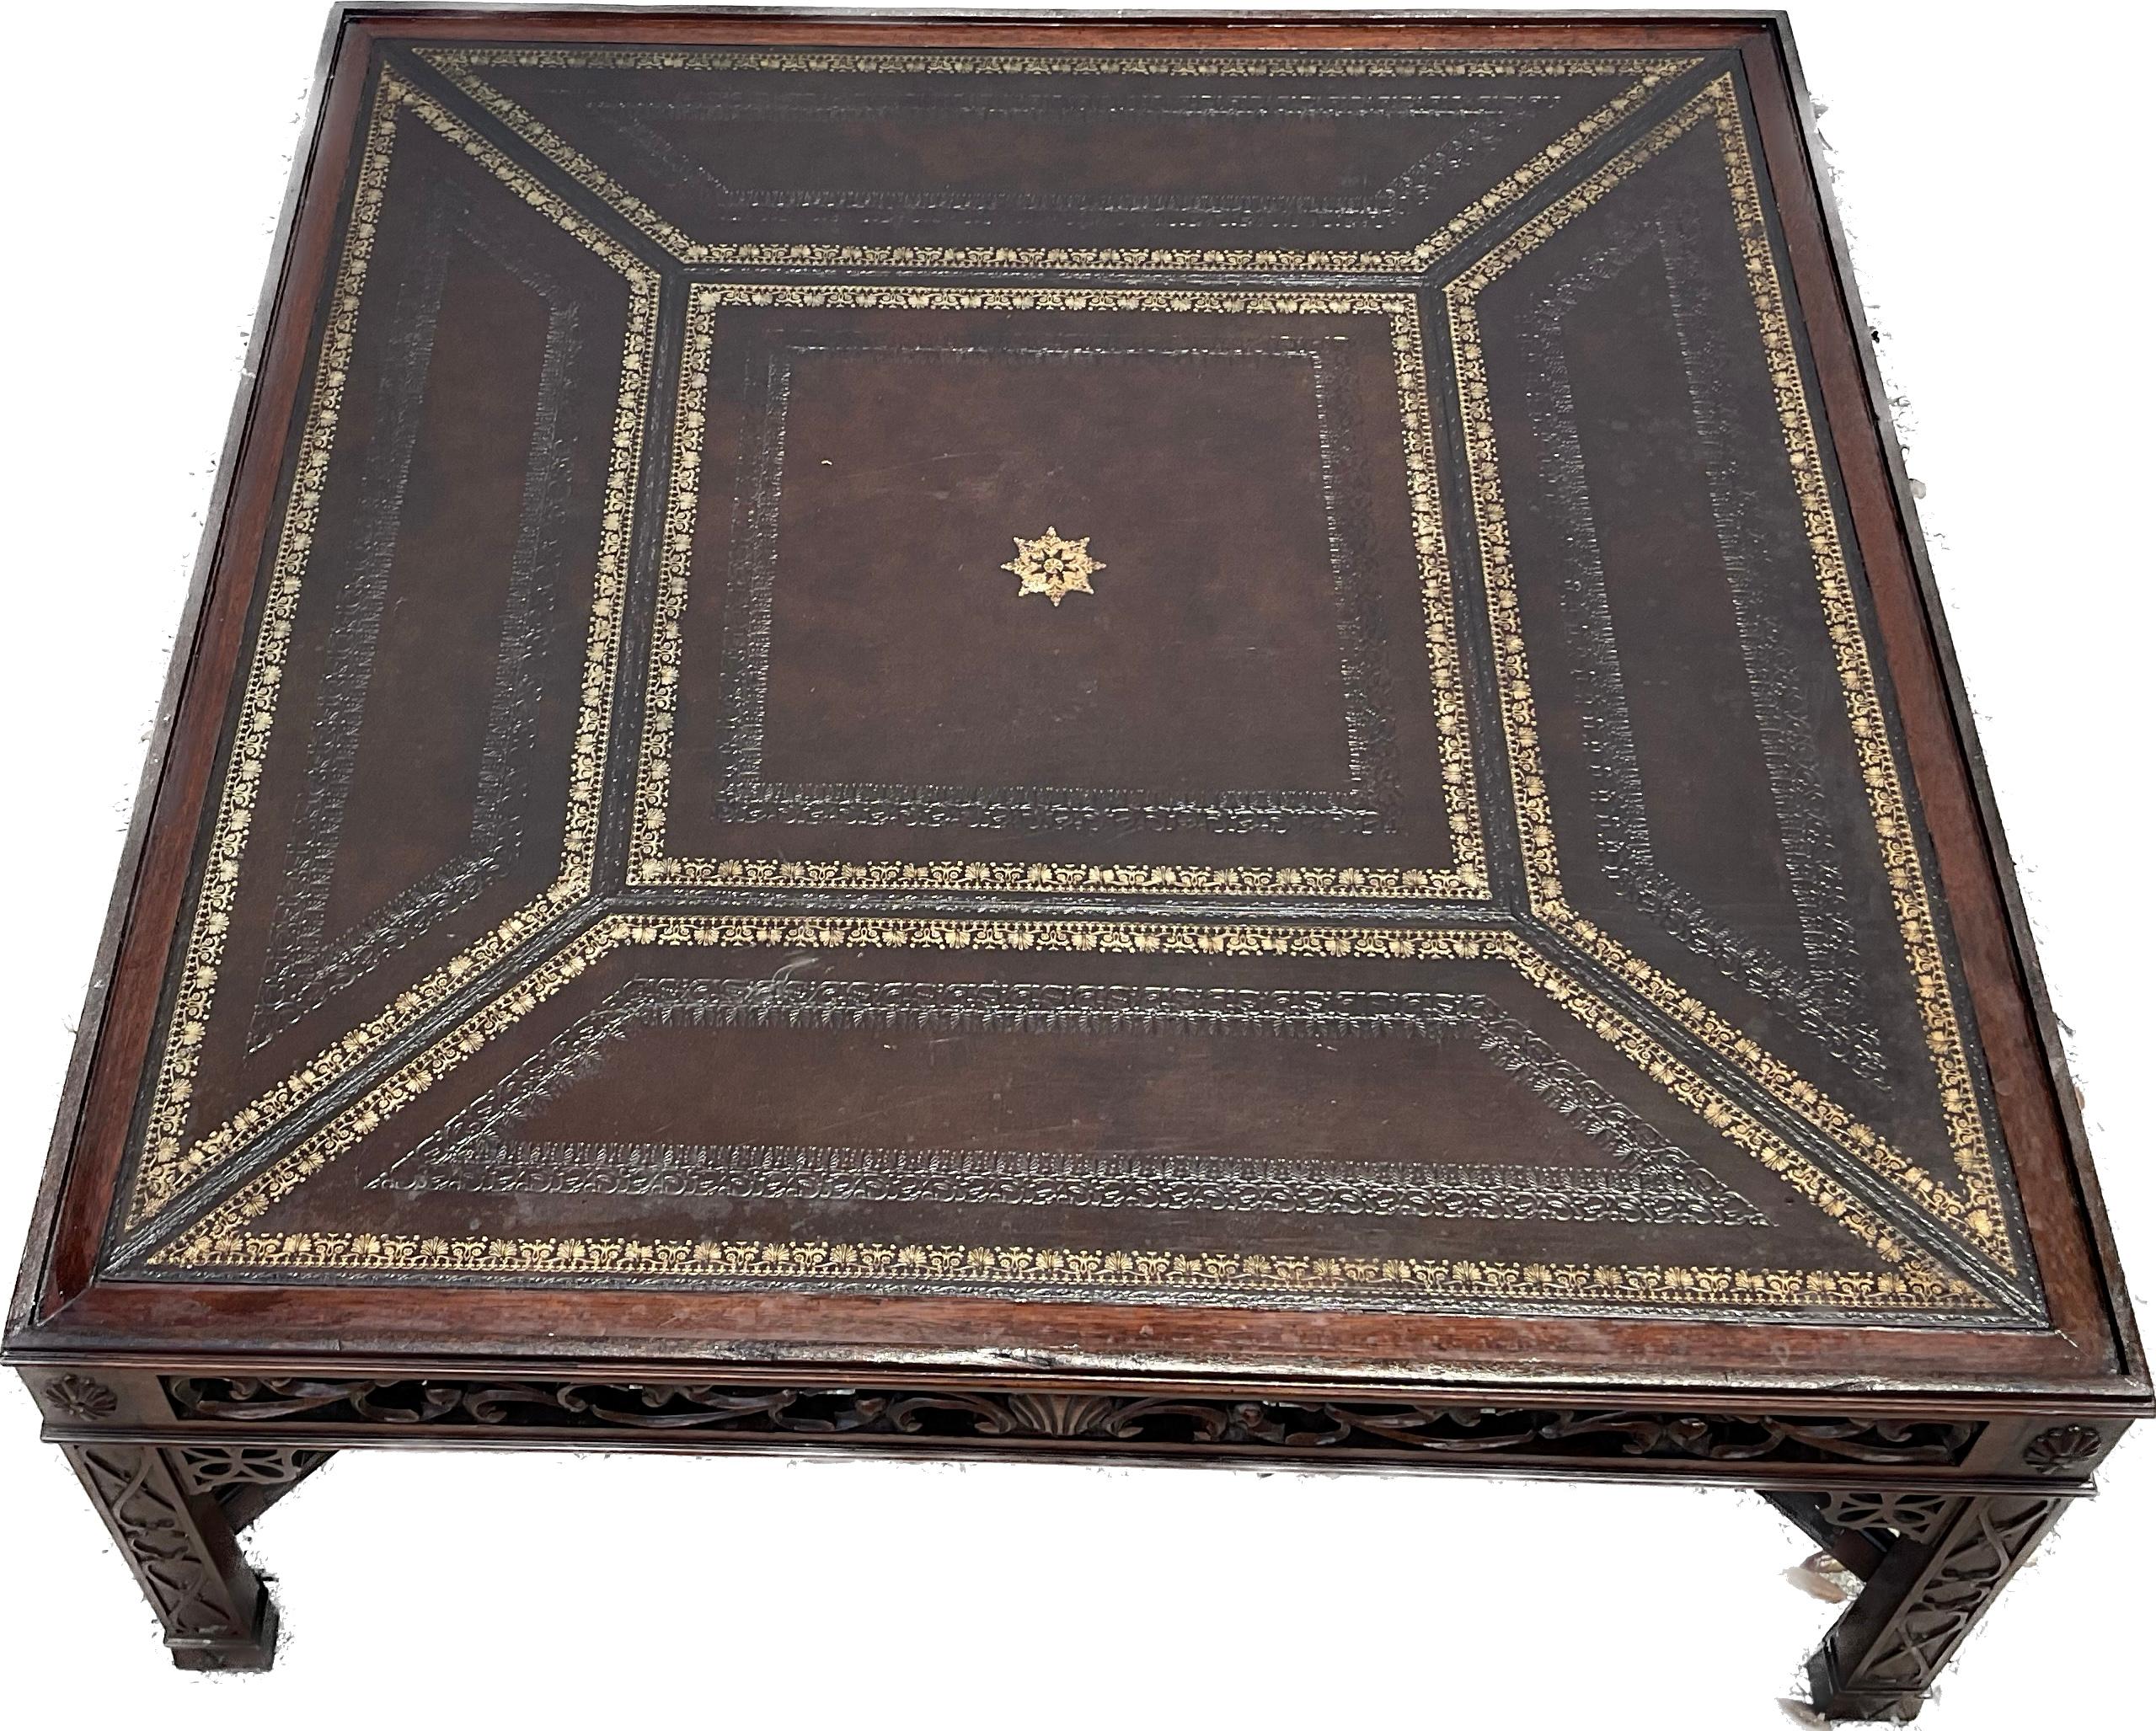 Large Maitland Smith mid-20th century Chinese Chippendale style square coffee table. Table has gold tooled leather inserts on top on beautifully carved and scrolled wood frame. Made in Philippines for Maitland-Smith stamp on inside bottom.  